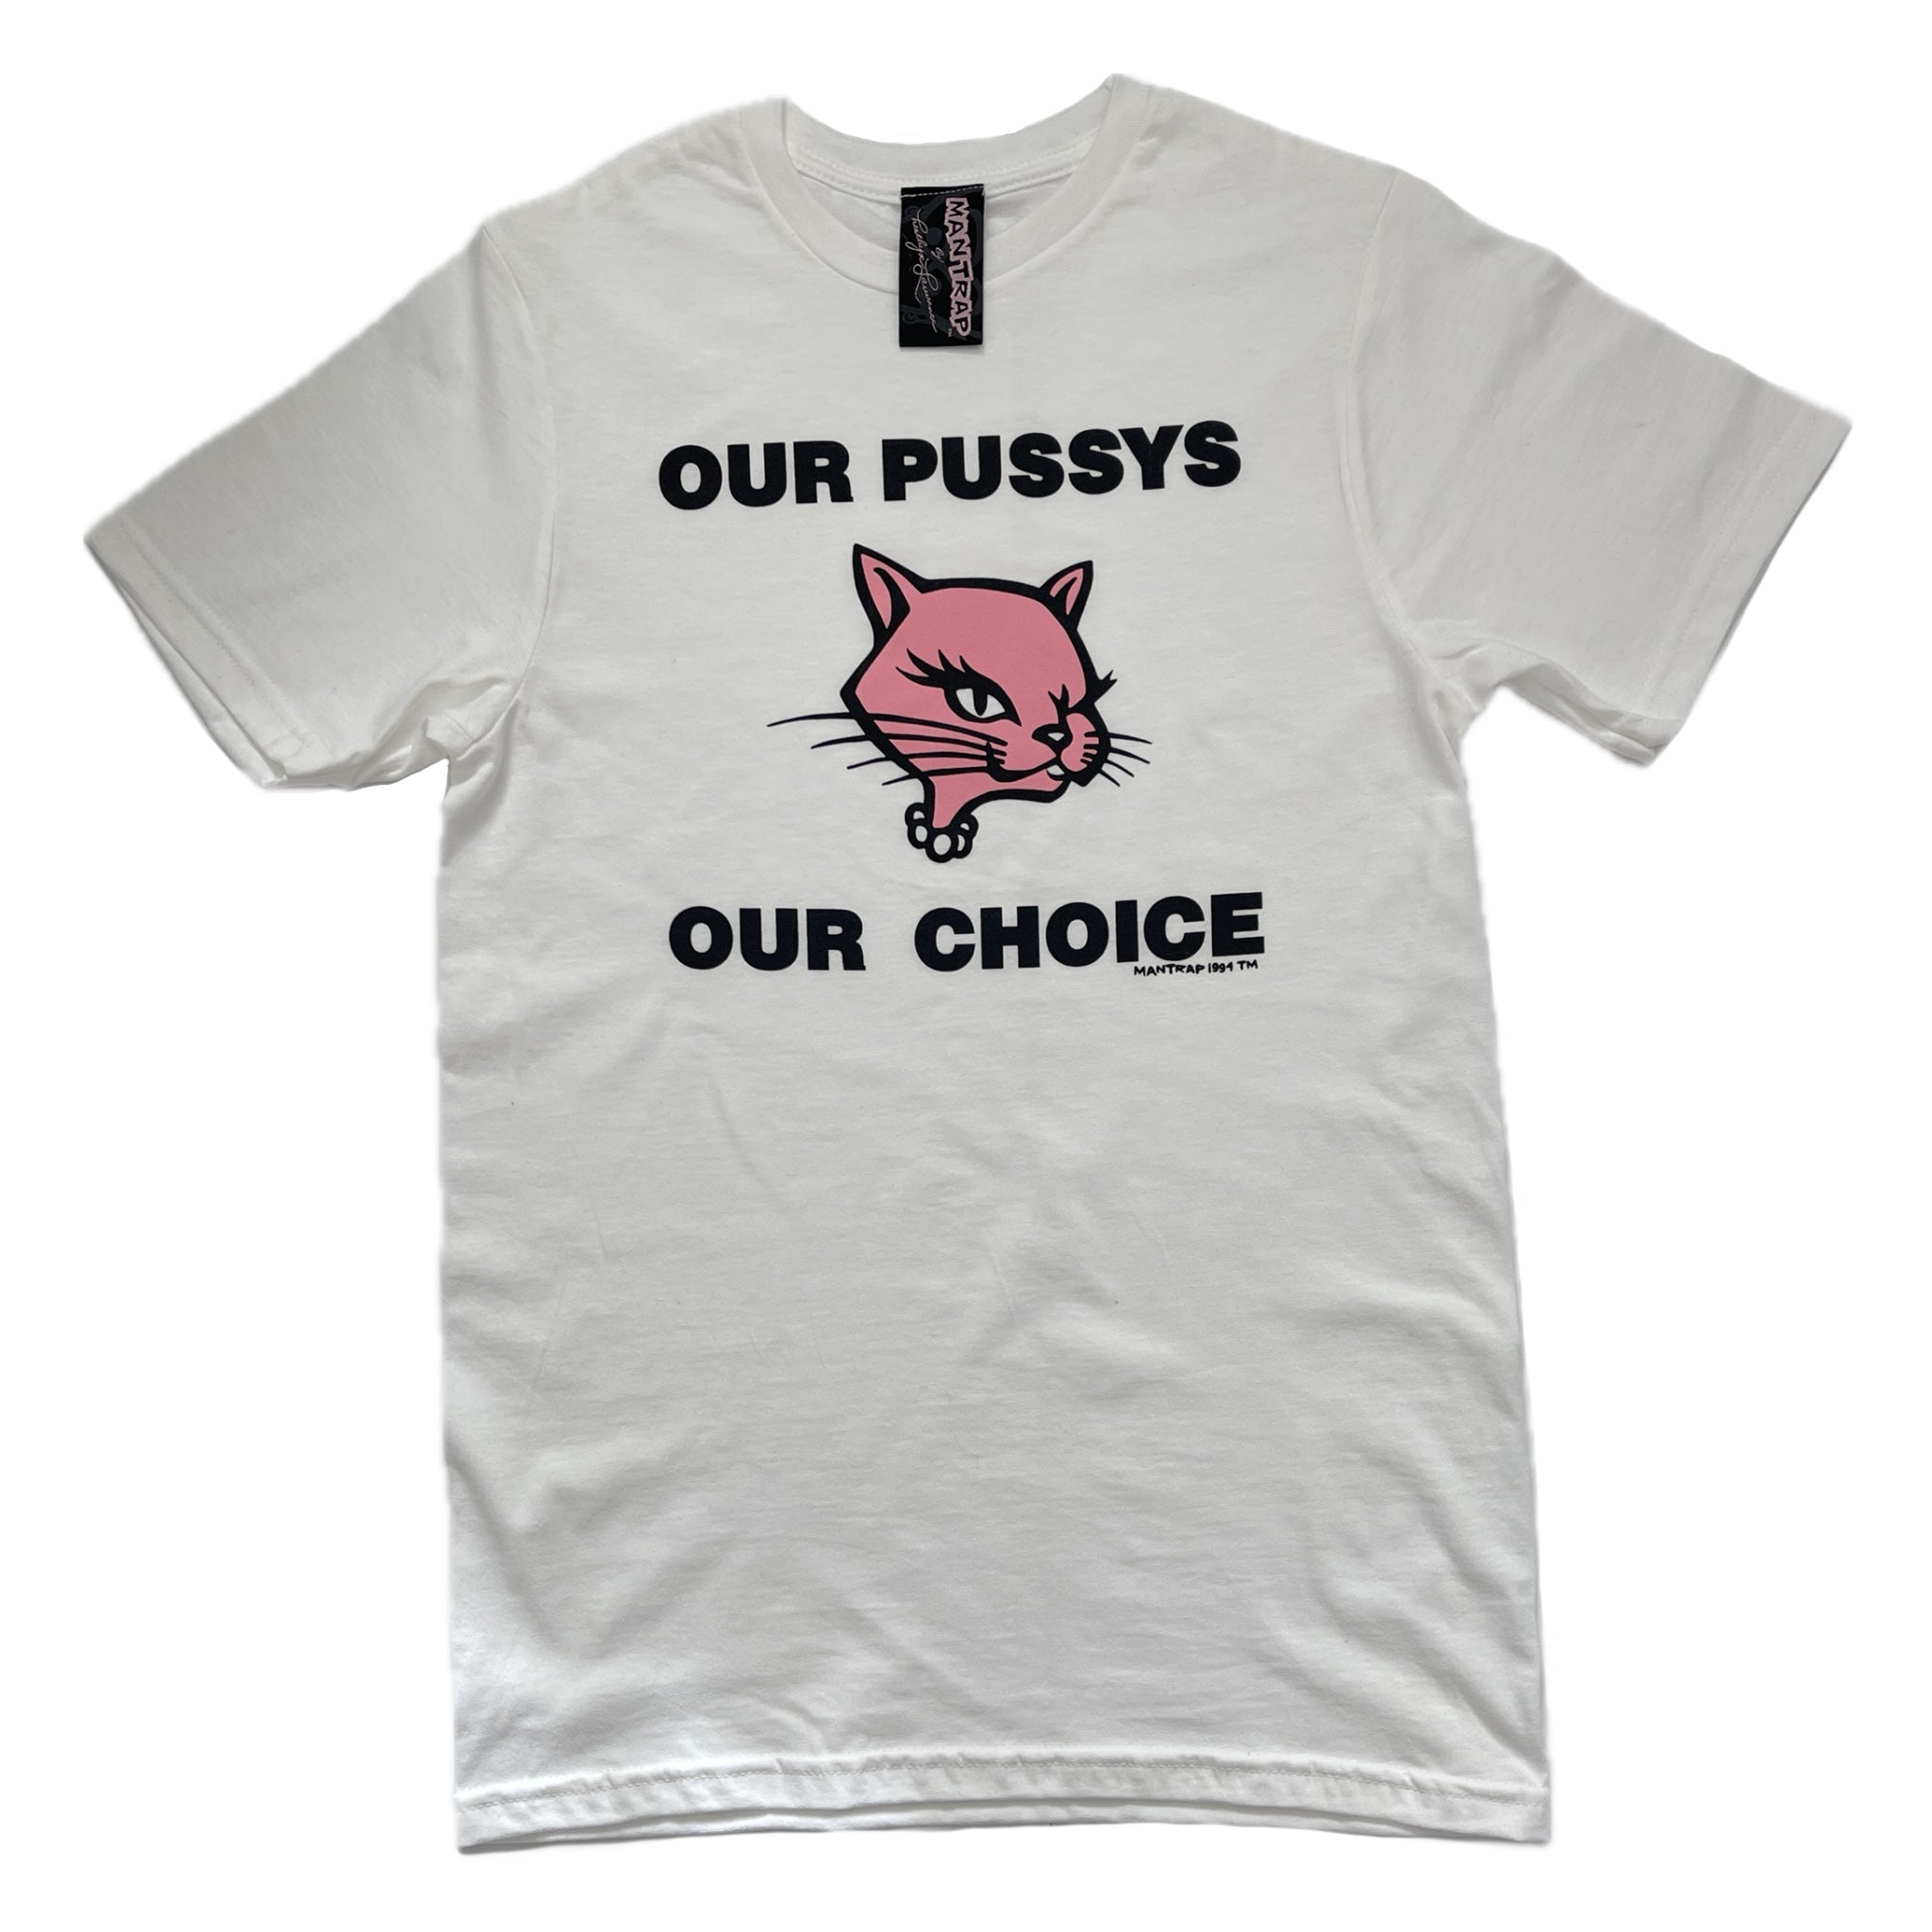 OUR P*SSYS OUR CHOICE TEE.